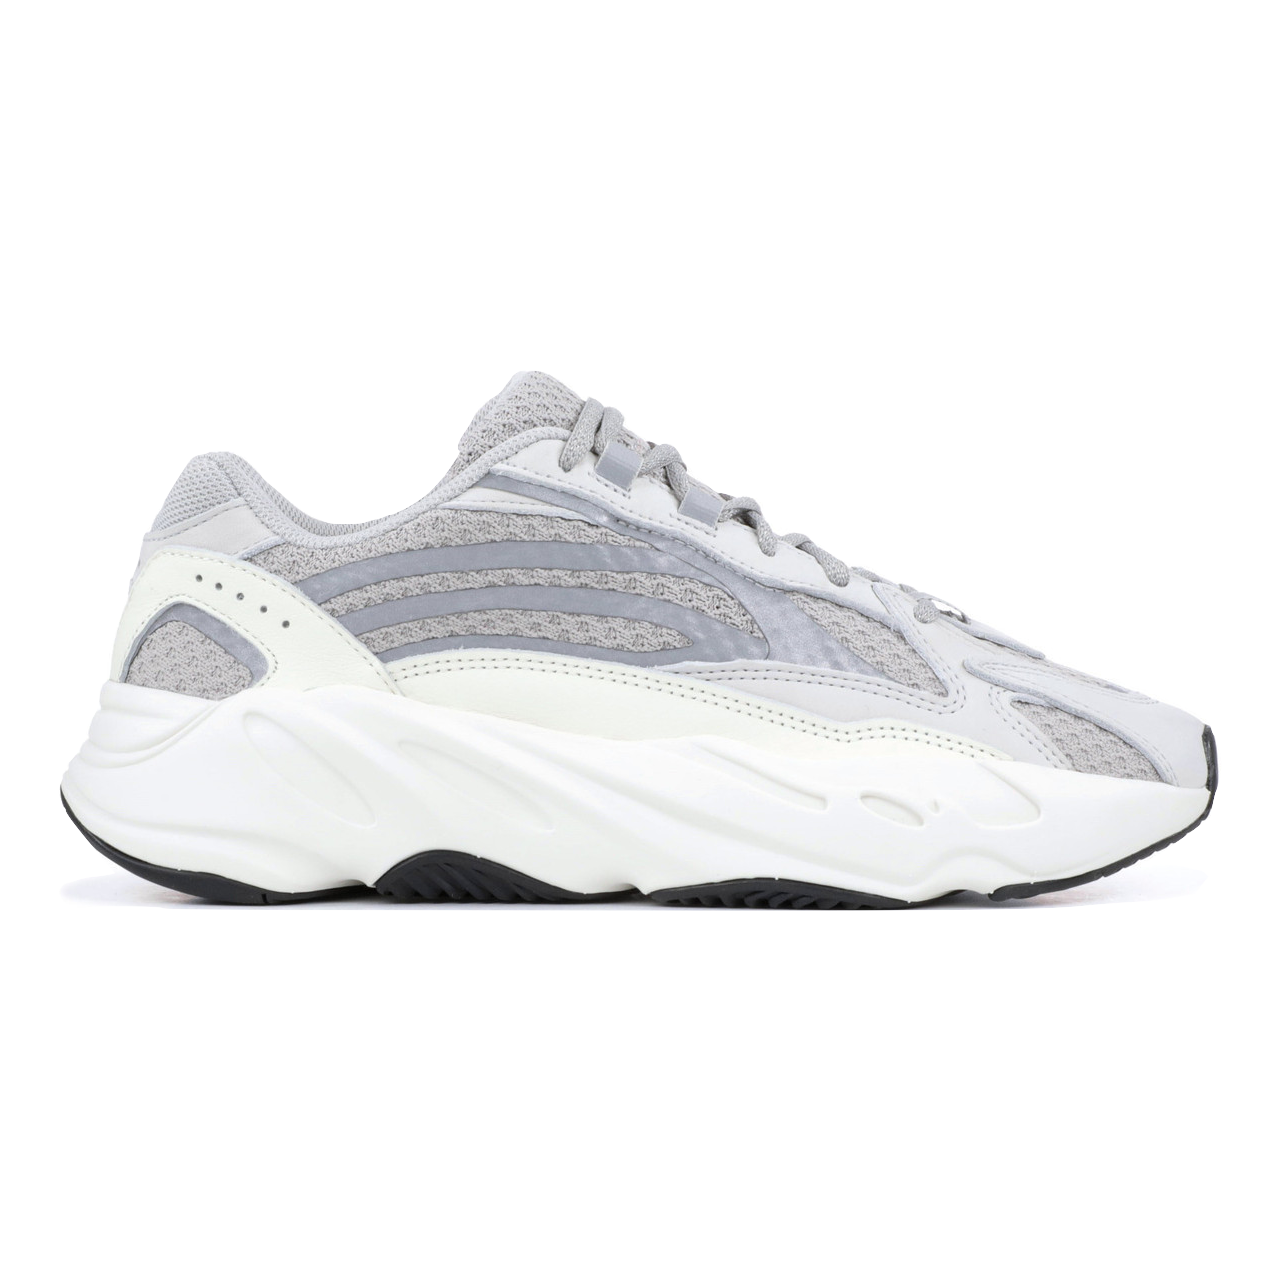 Yeezy Boost 700 V2 - Static - Used